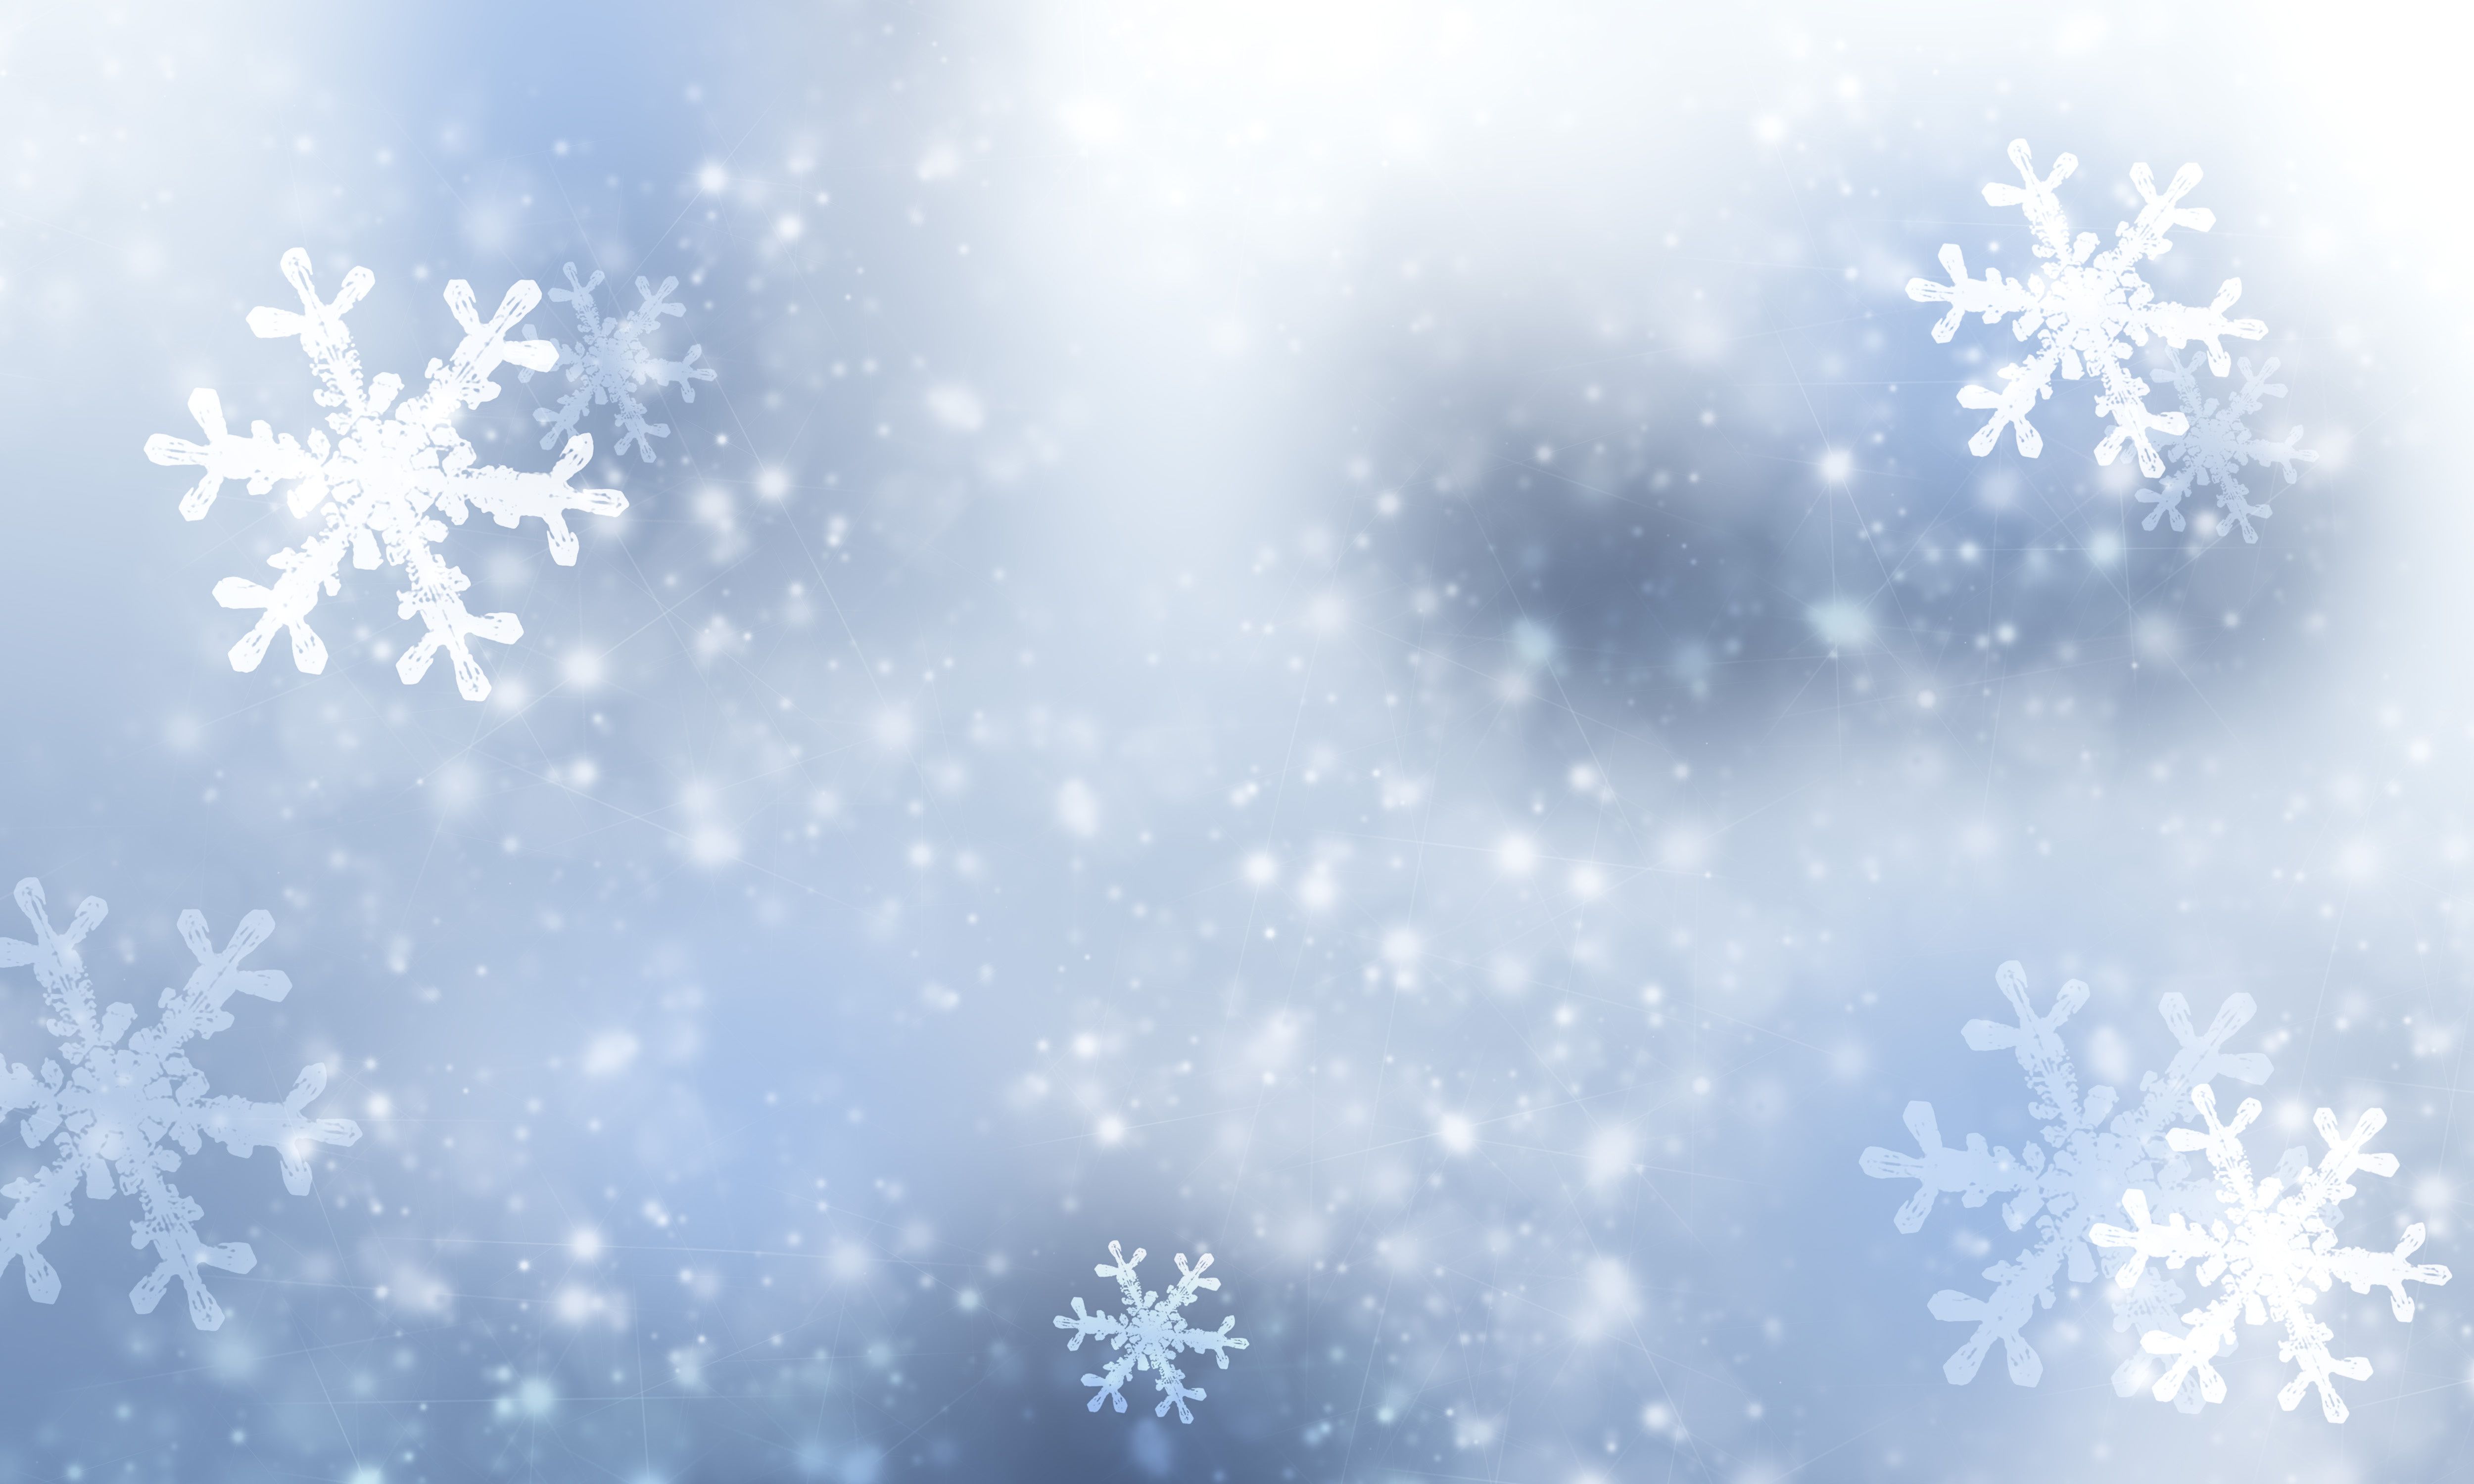 Snowflakes falling on a blue background - Snowflake